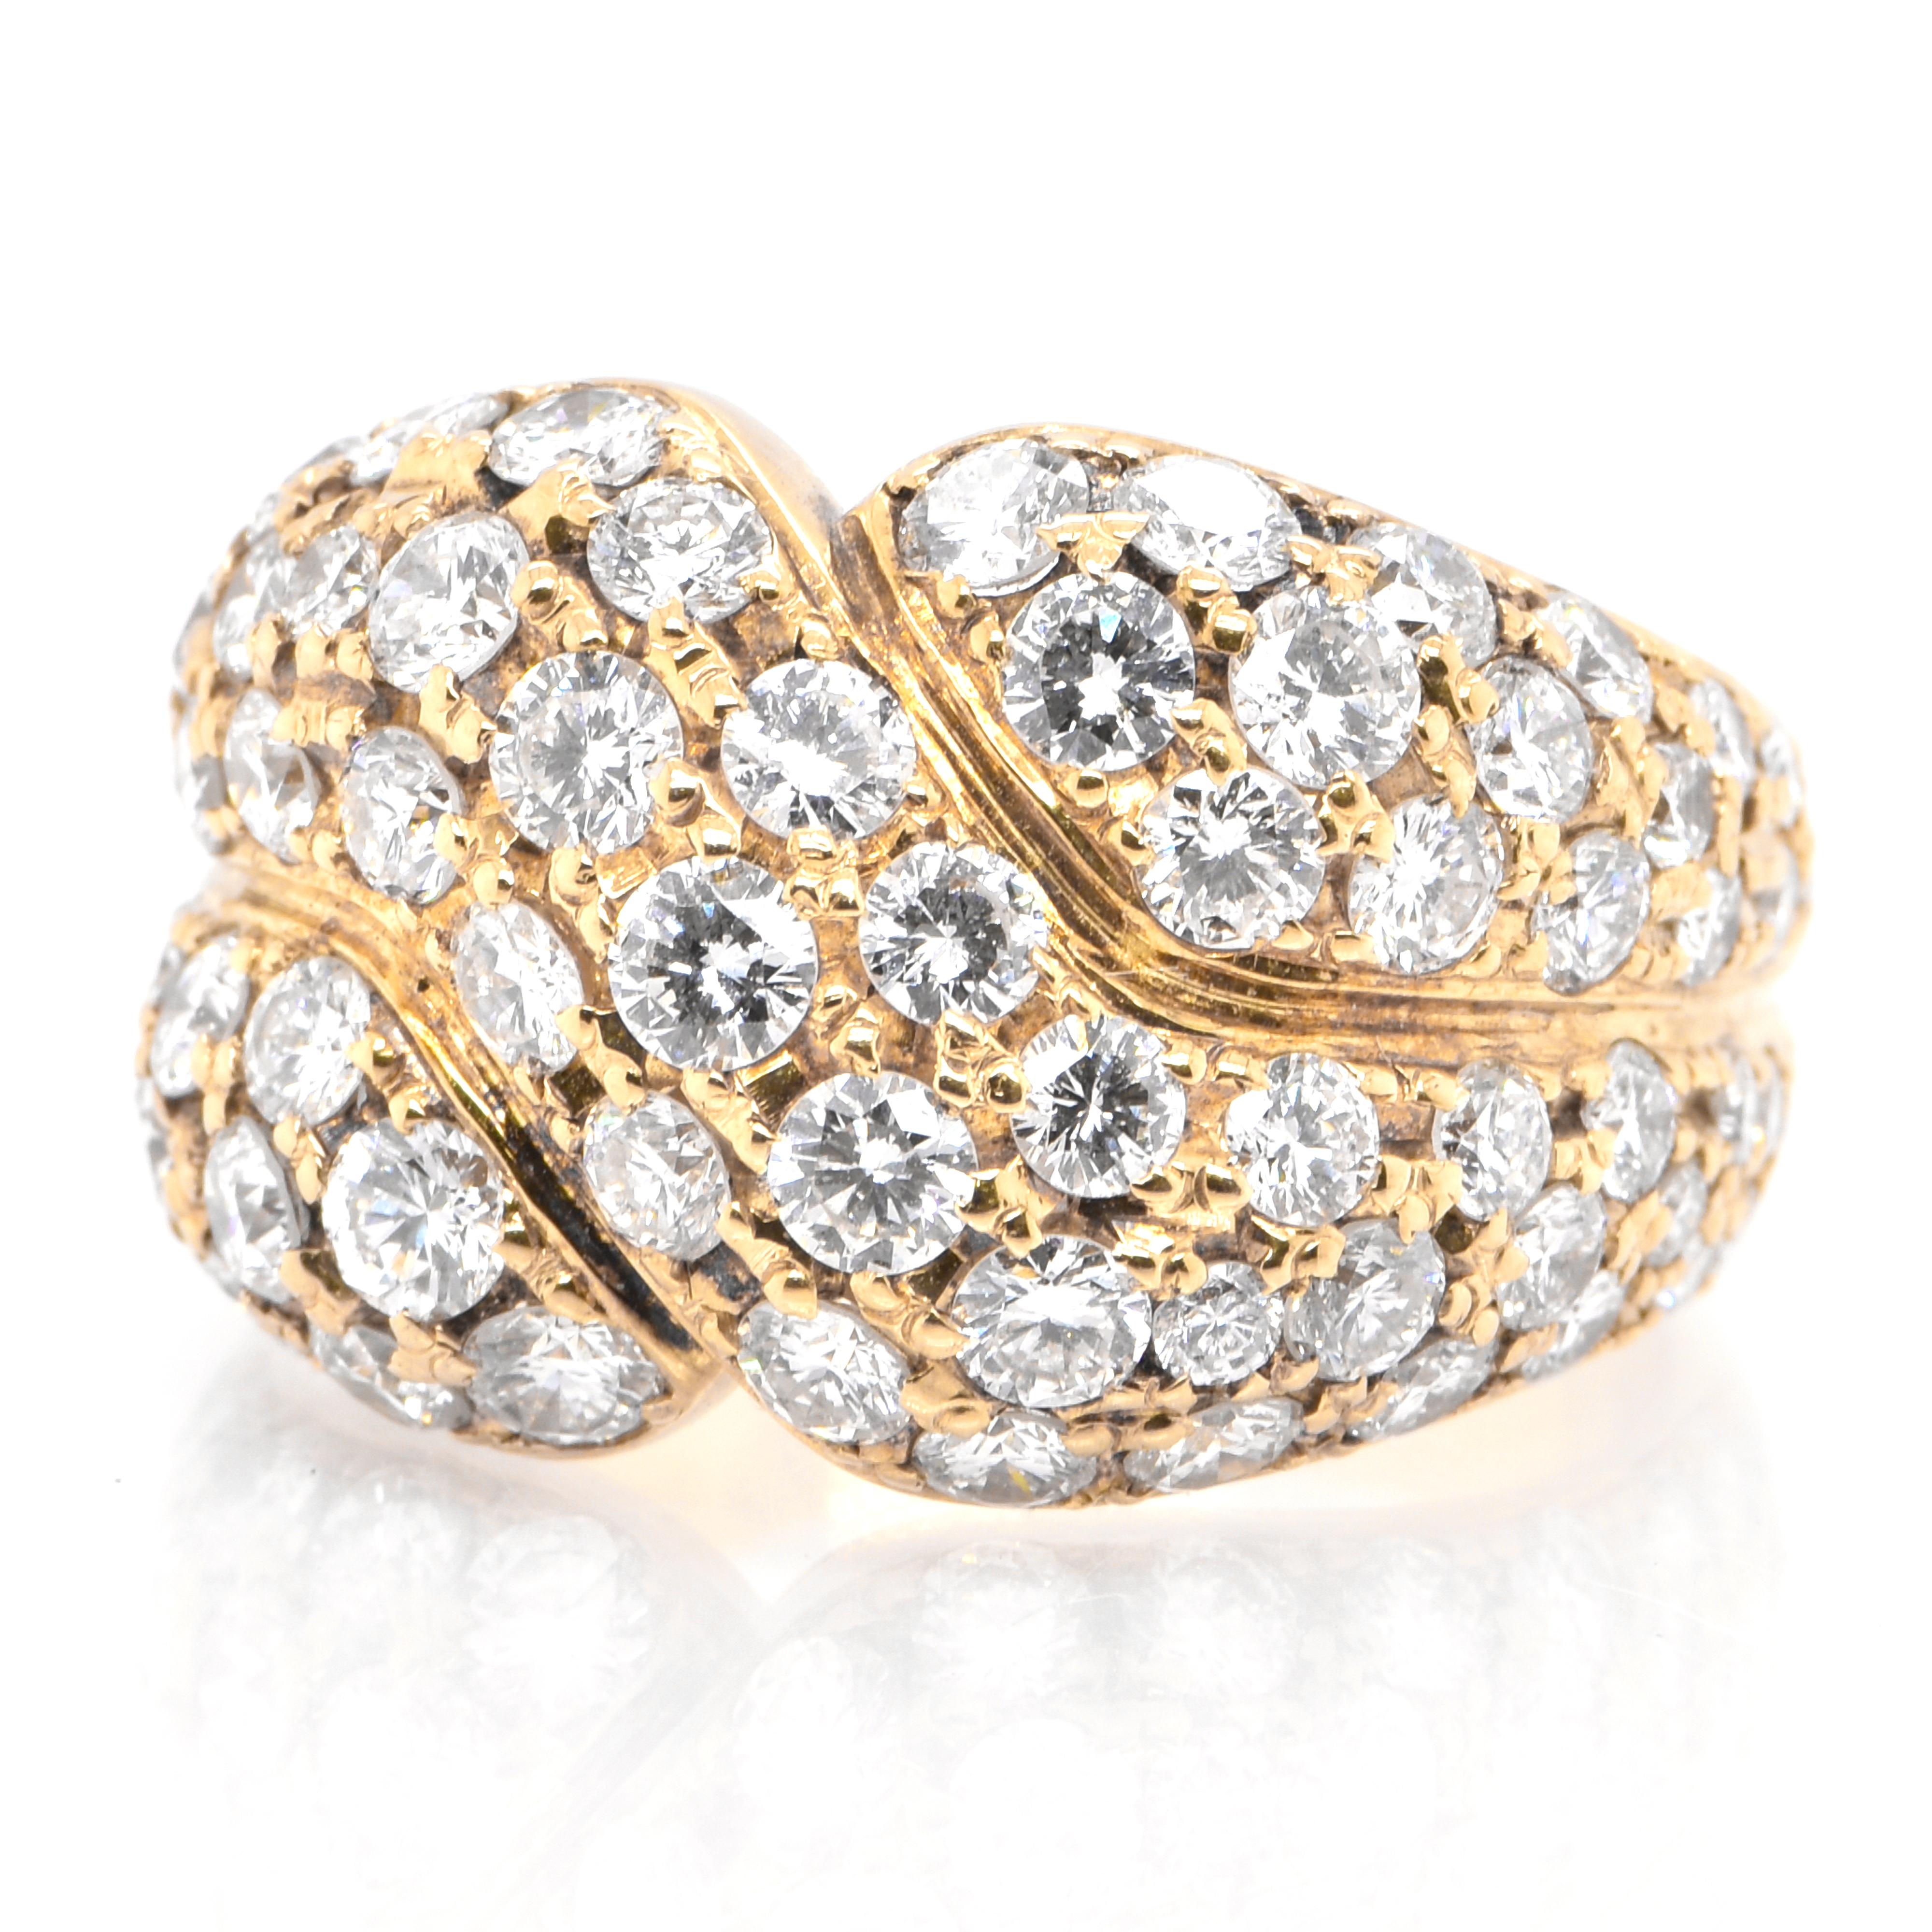 A beautiful cluster ring featuring 3.20 carats of Diamonds set in 18 Karat Yellow Gold. Diamonds have been adorned and cherished throughout human history and date back to thousands of years. They are rated as 10 on the Mohs Hardness Scale hence are